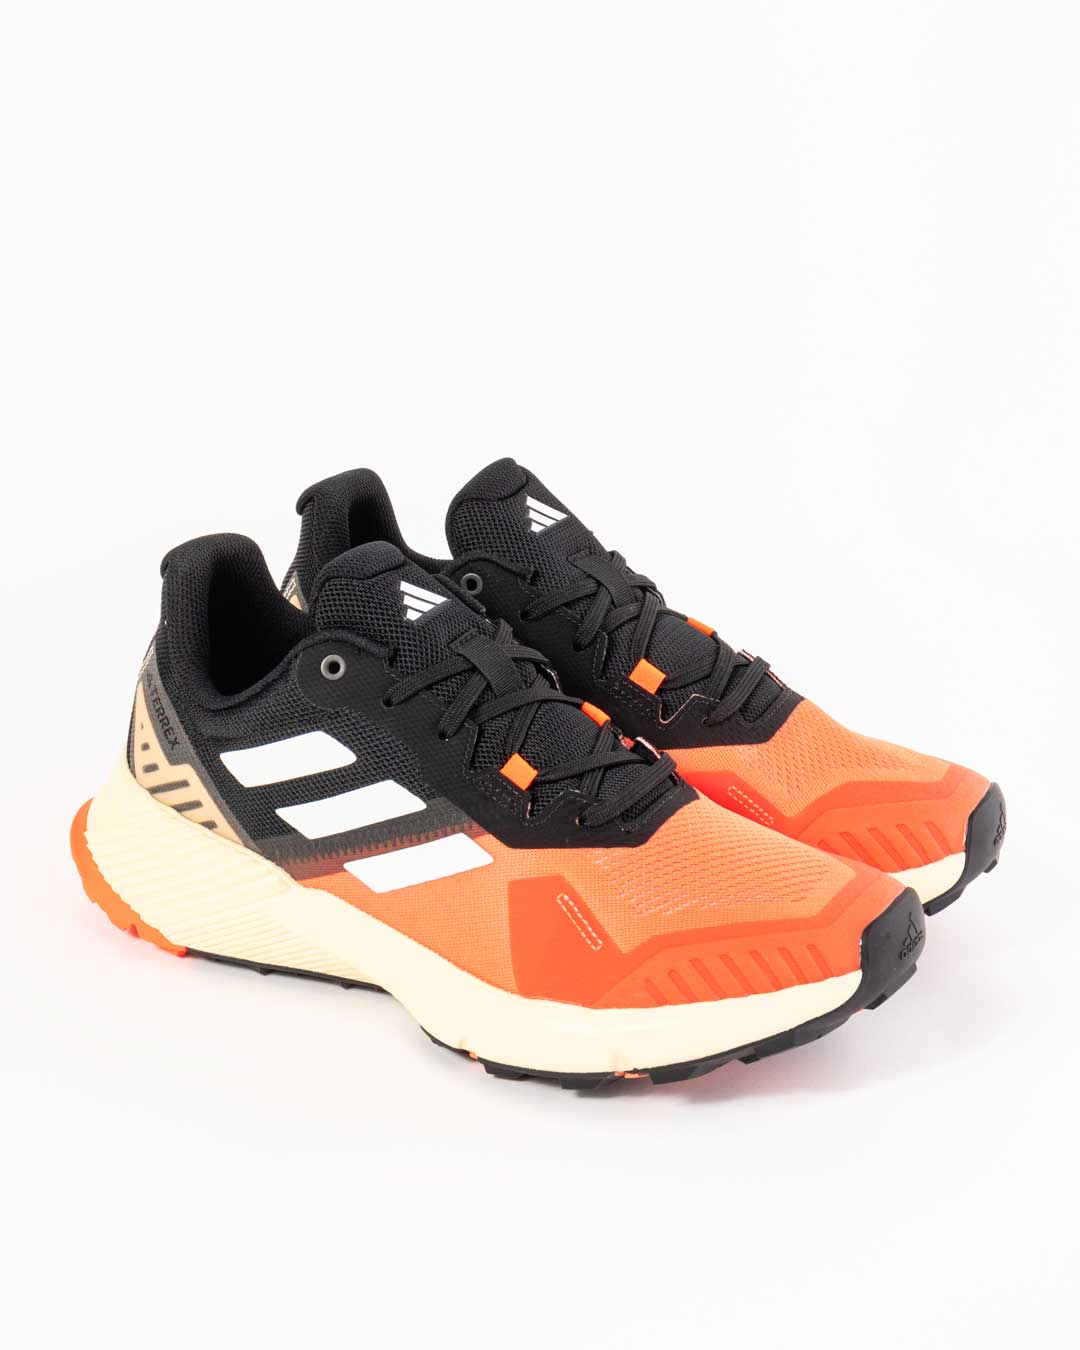 side angled shot of men's adidas trainers in orange and black paneling with cream midsole. Three stripes in white on upper and adidas logo embossed on toe cap.